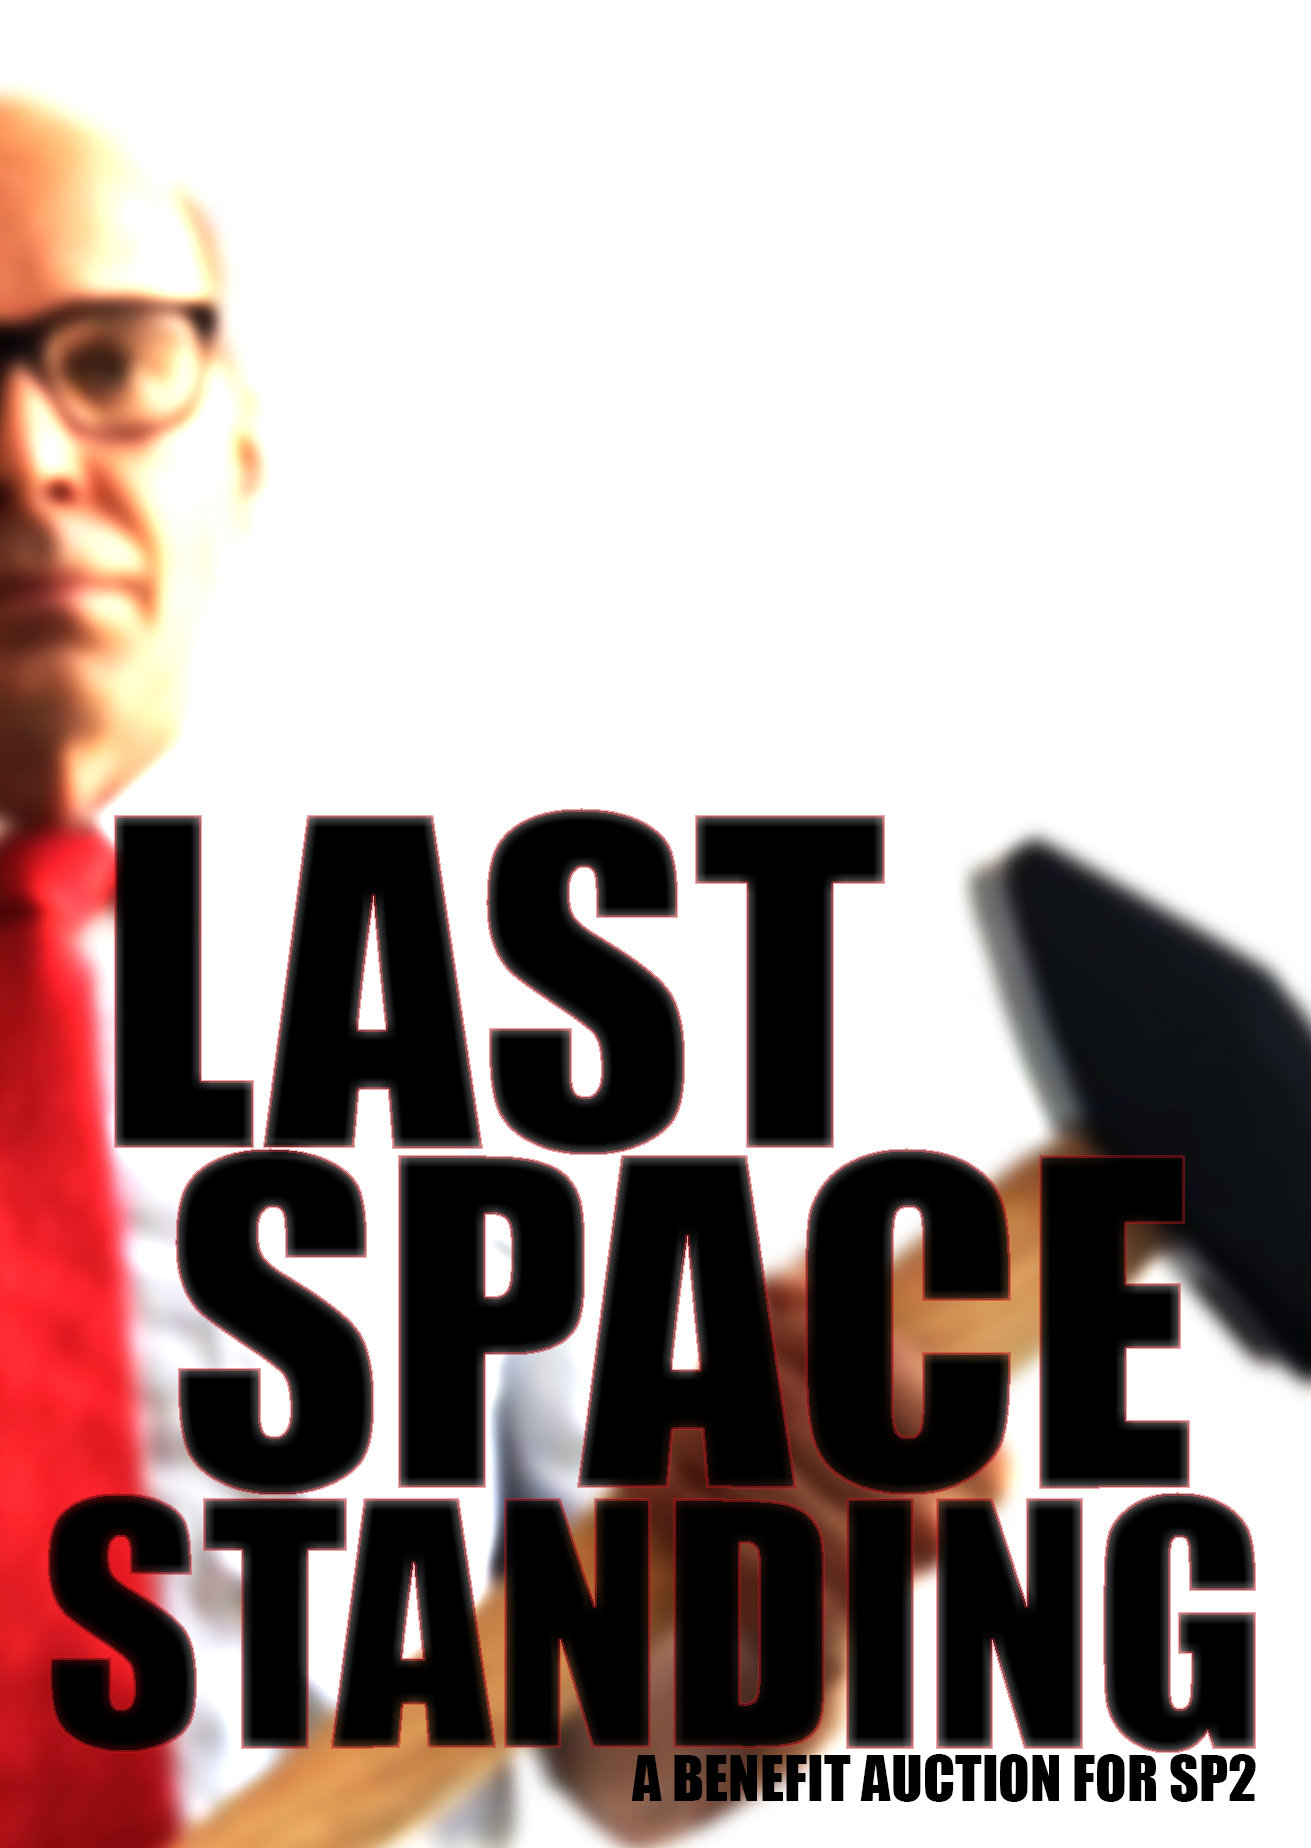 Last Space Standing - A Benefit Auction for SP2, 2020